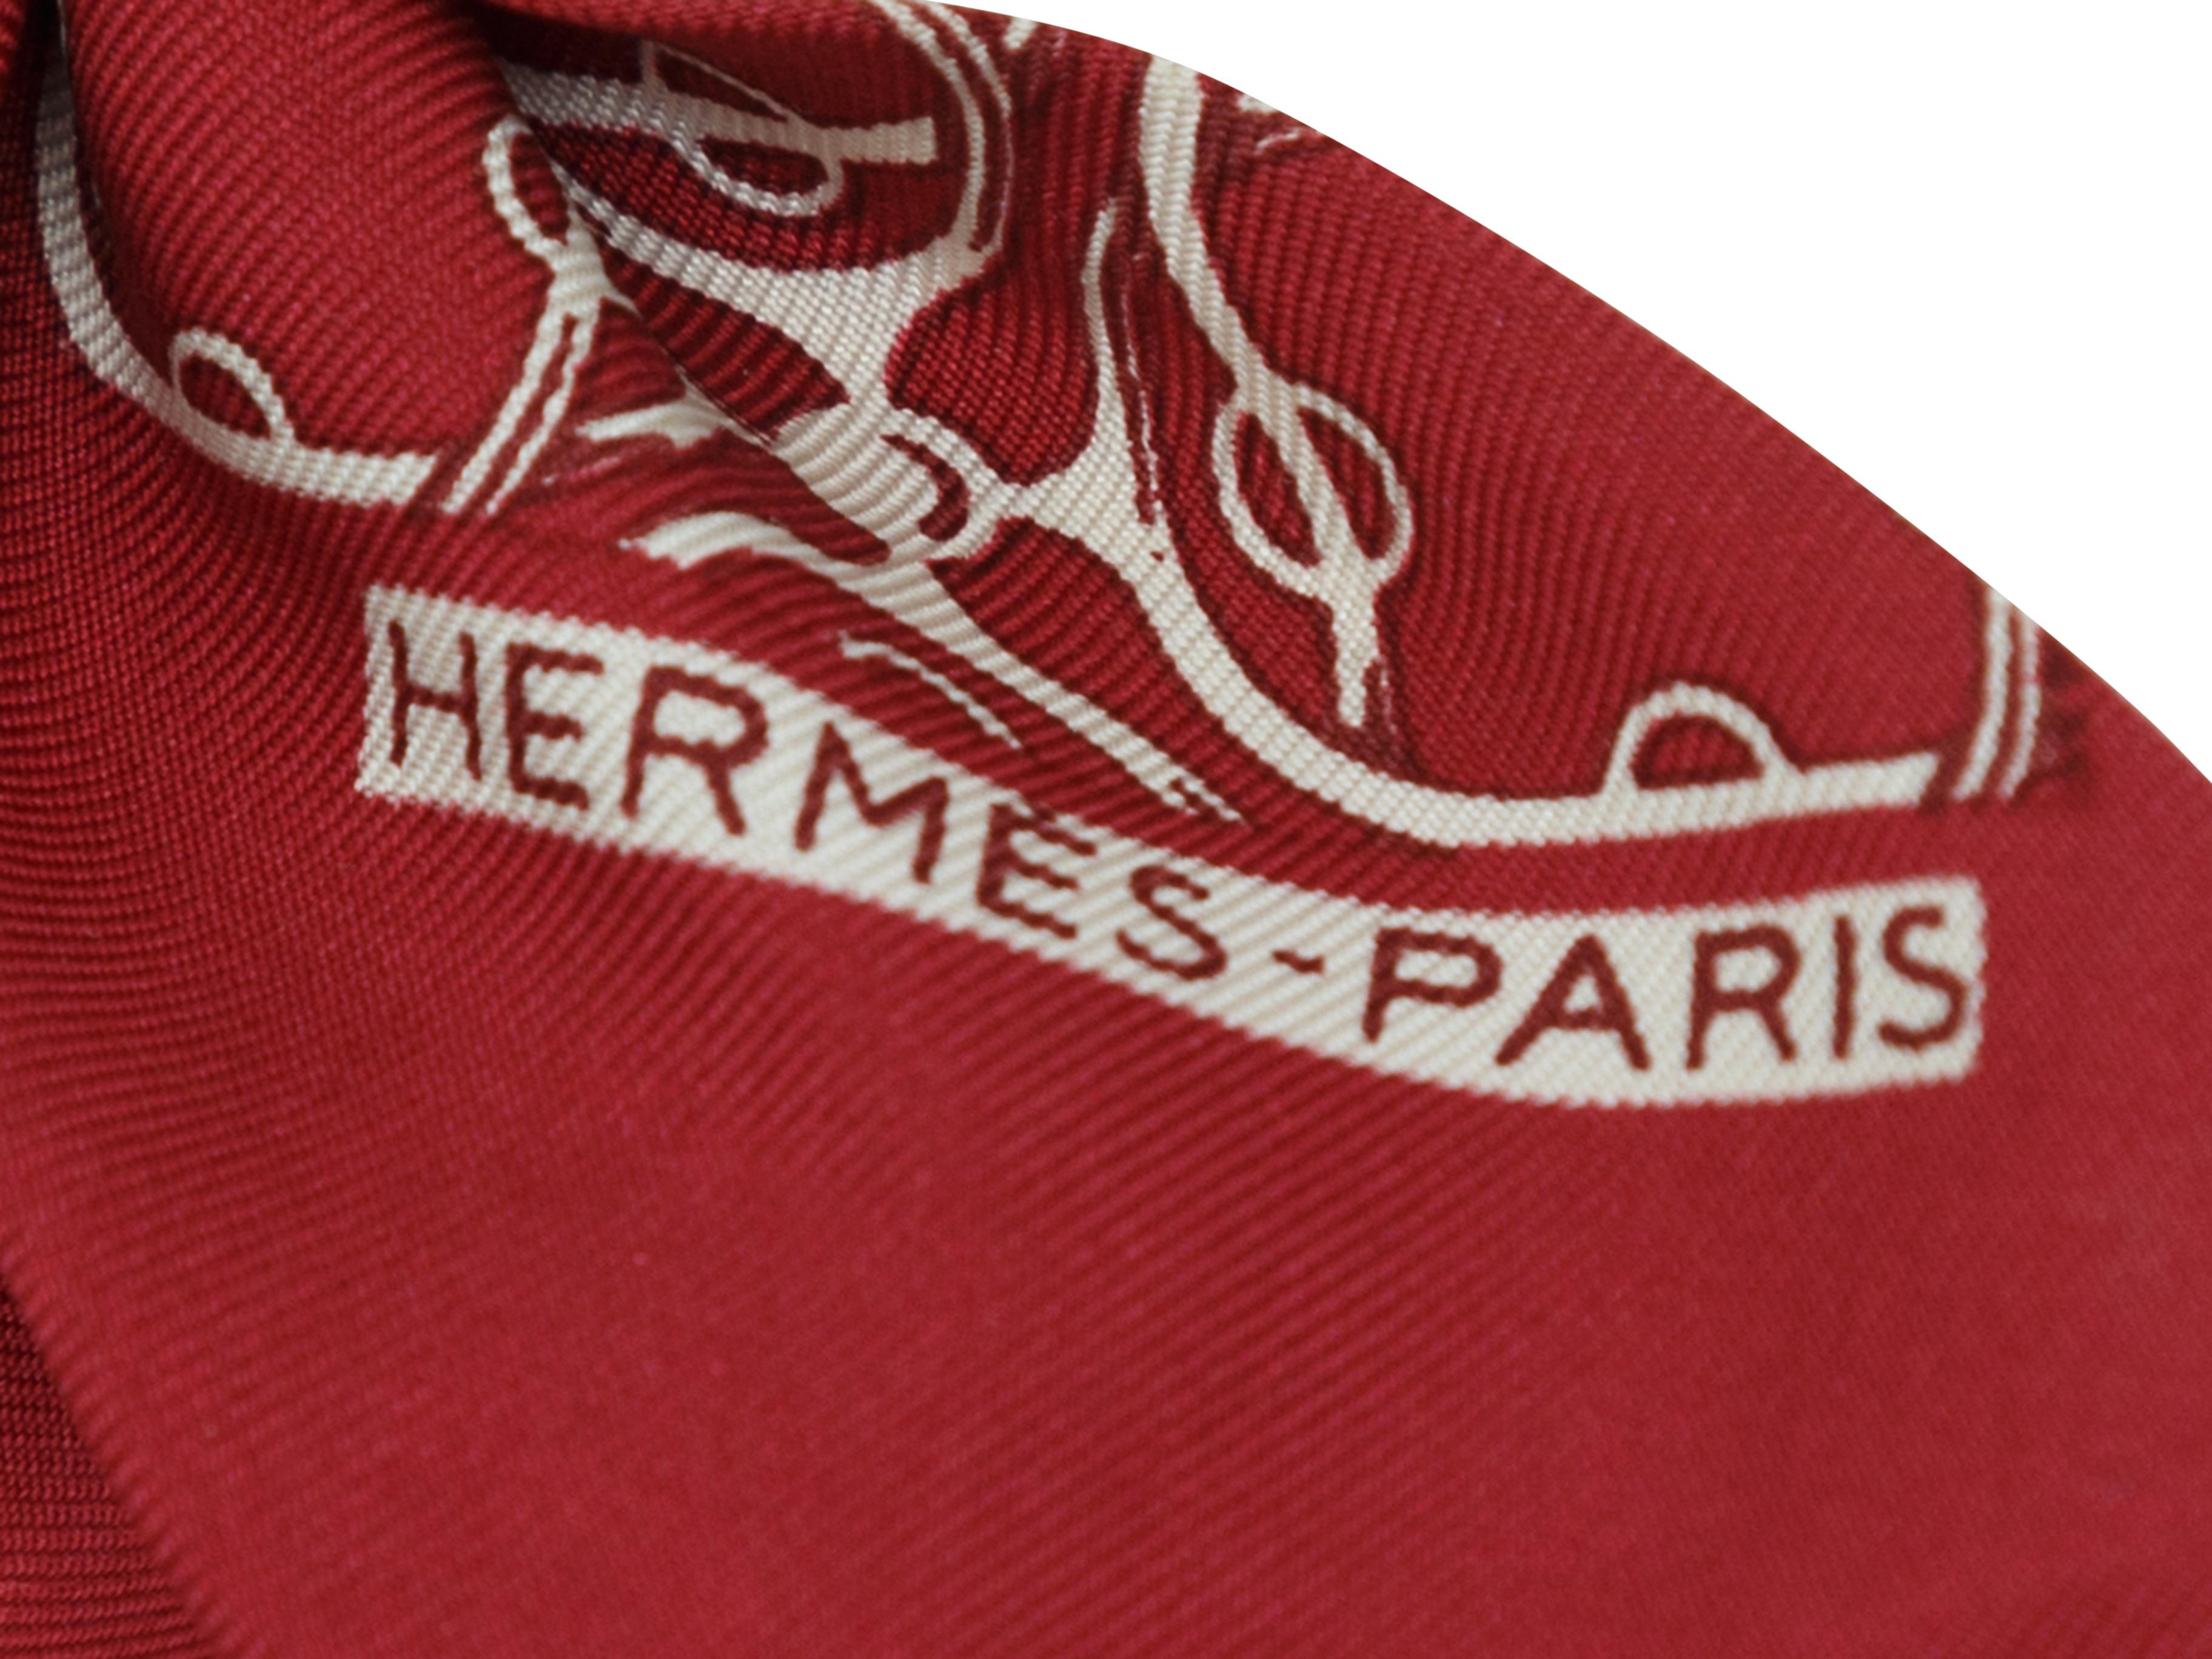 Product details: Burgundy and white neck tie scarf by Hermes. Abstract print throughout. 25.5